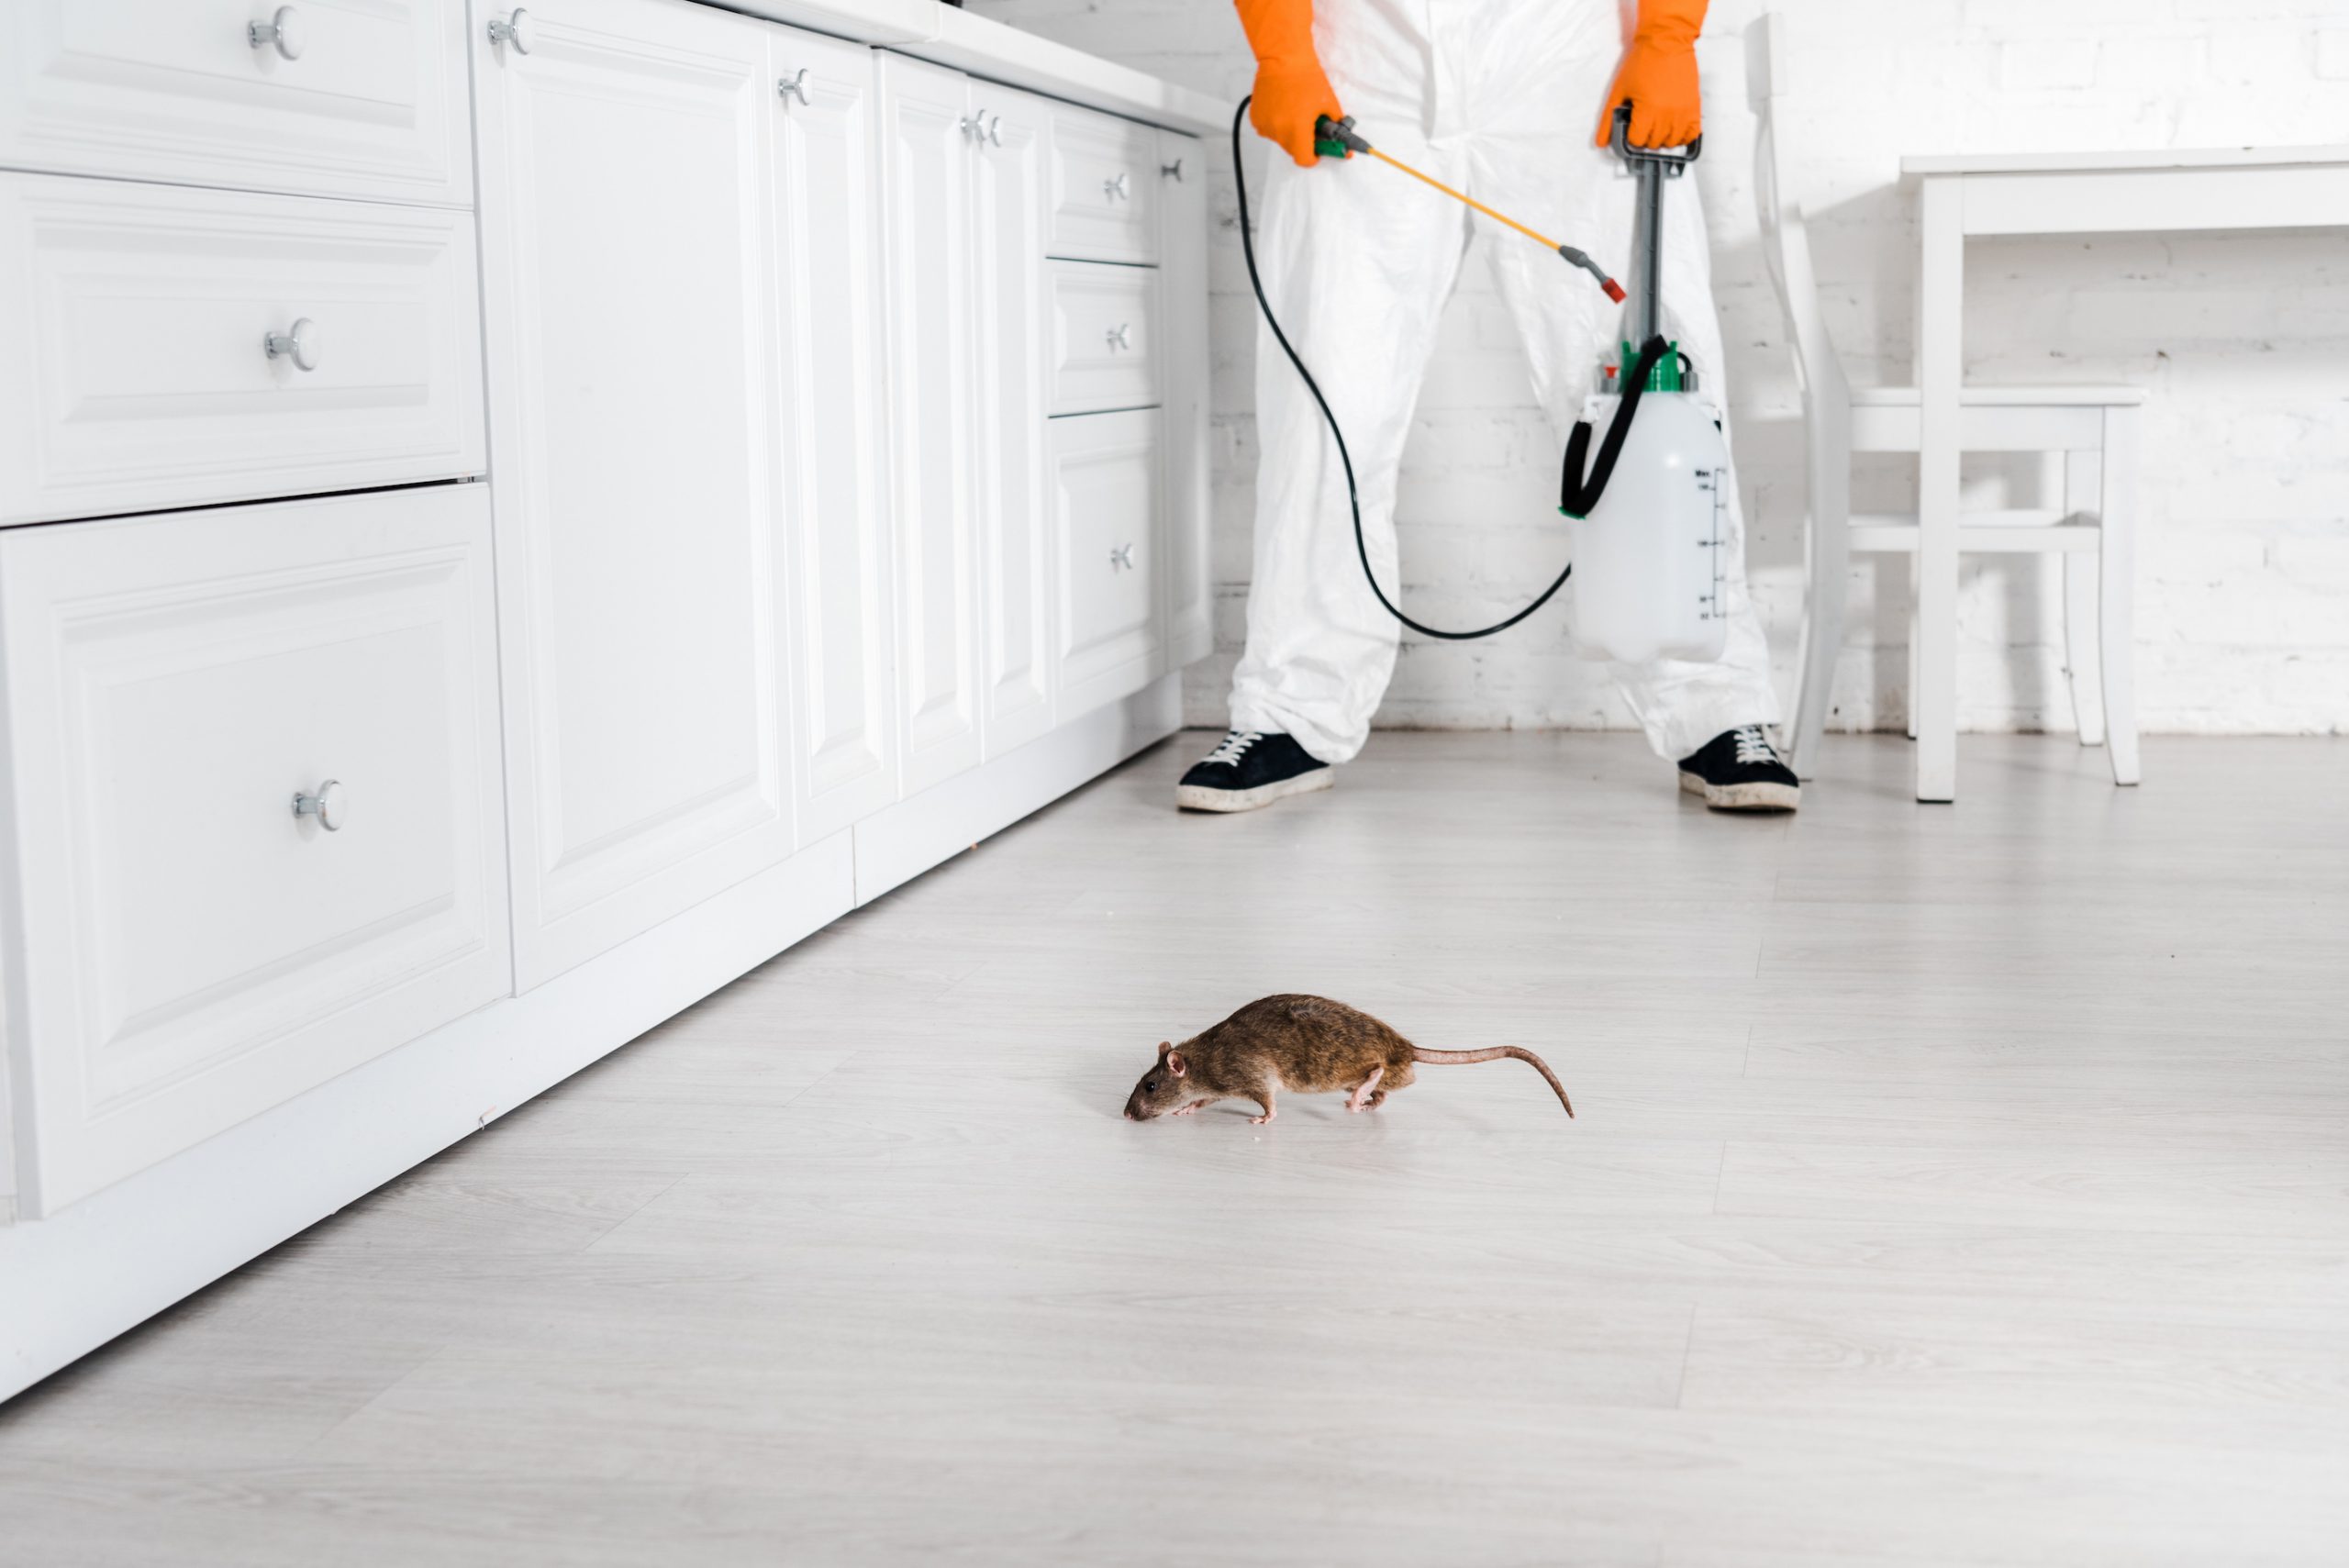 How to Get Rid of Mice and Other Rodents